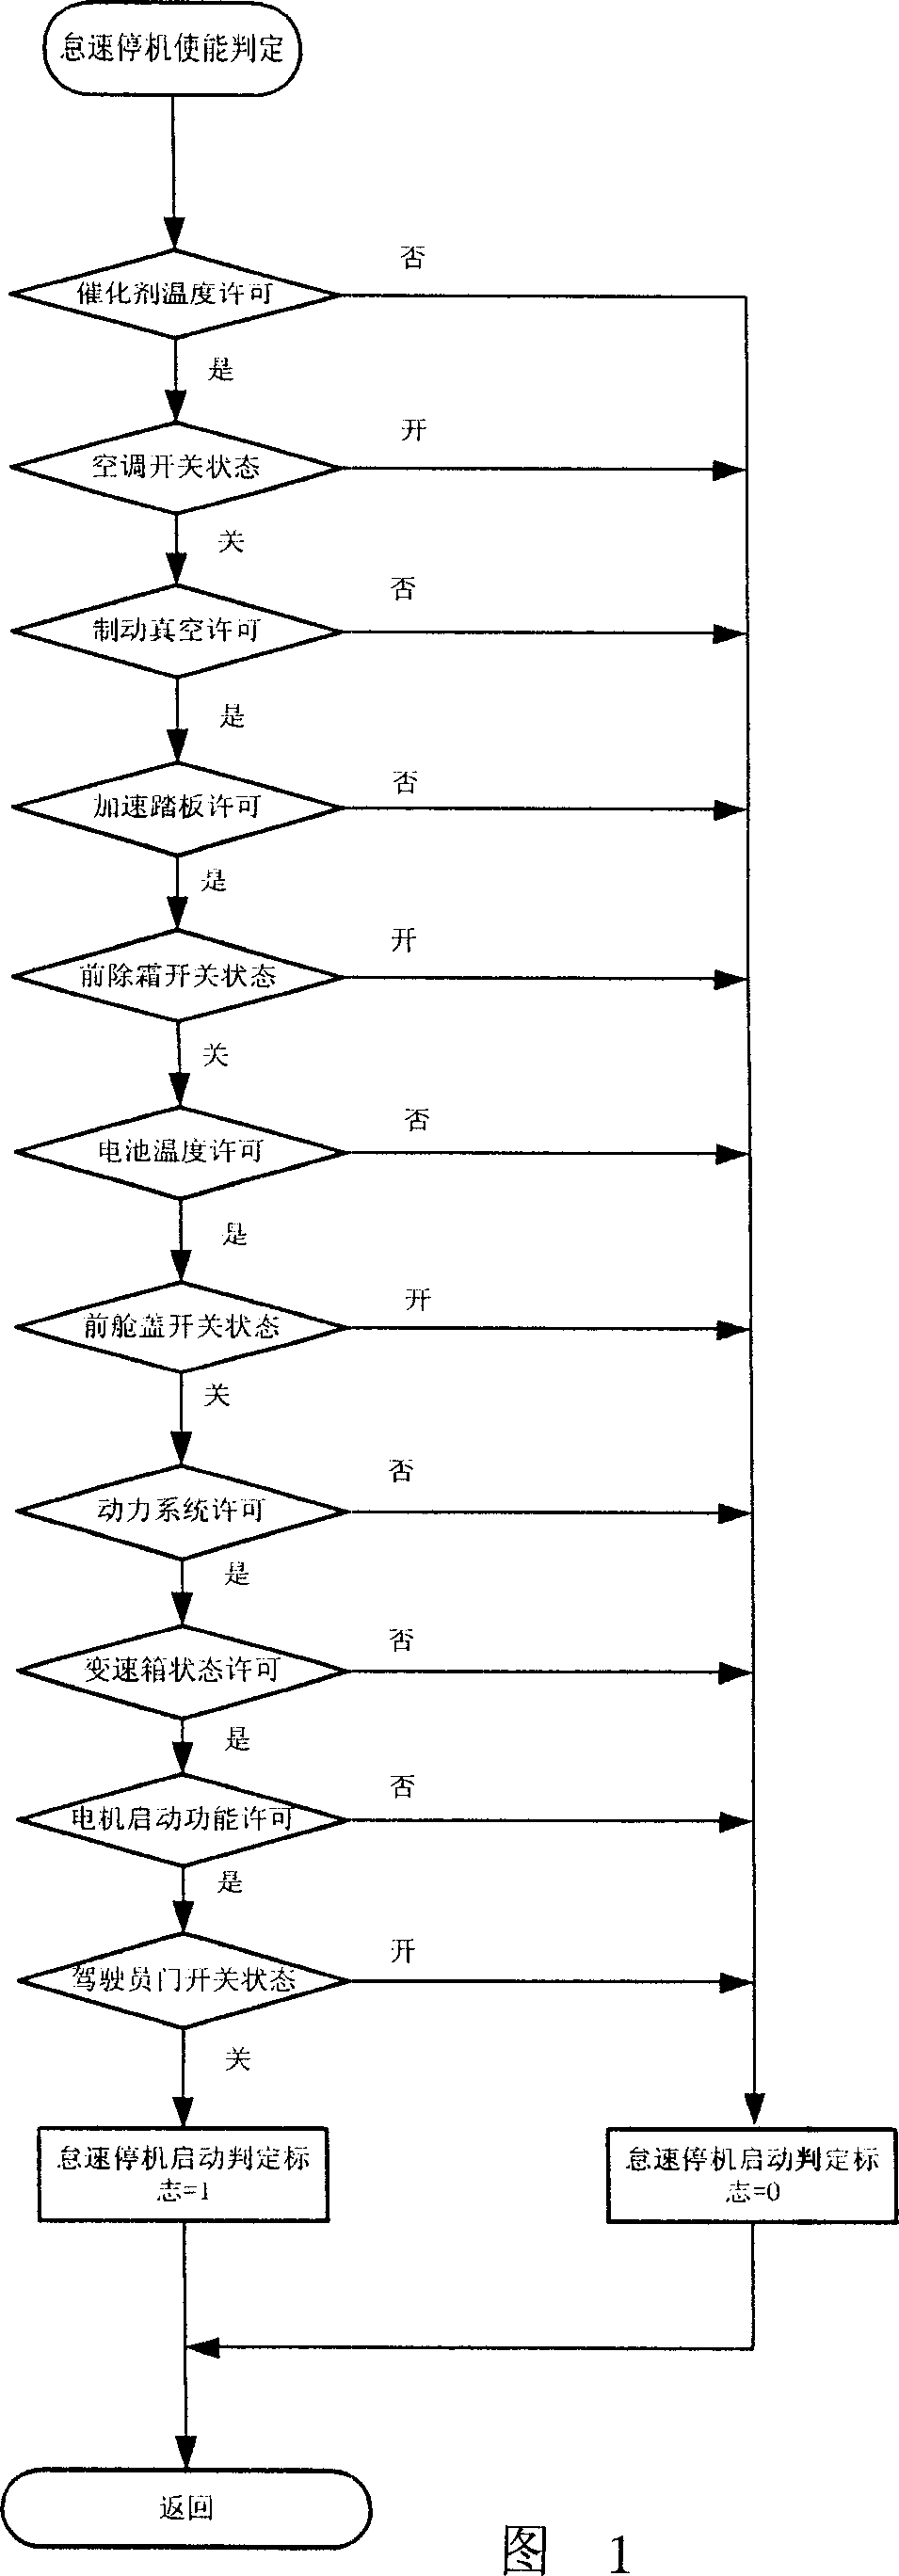 Engine start control method for mixed power automobile